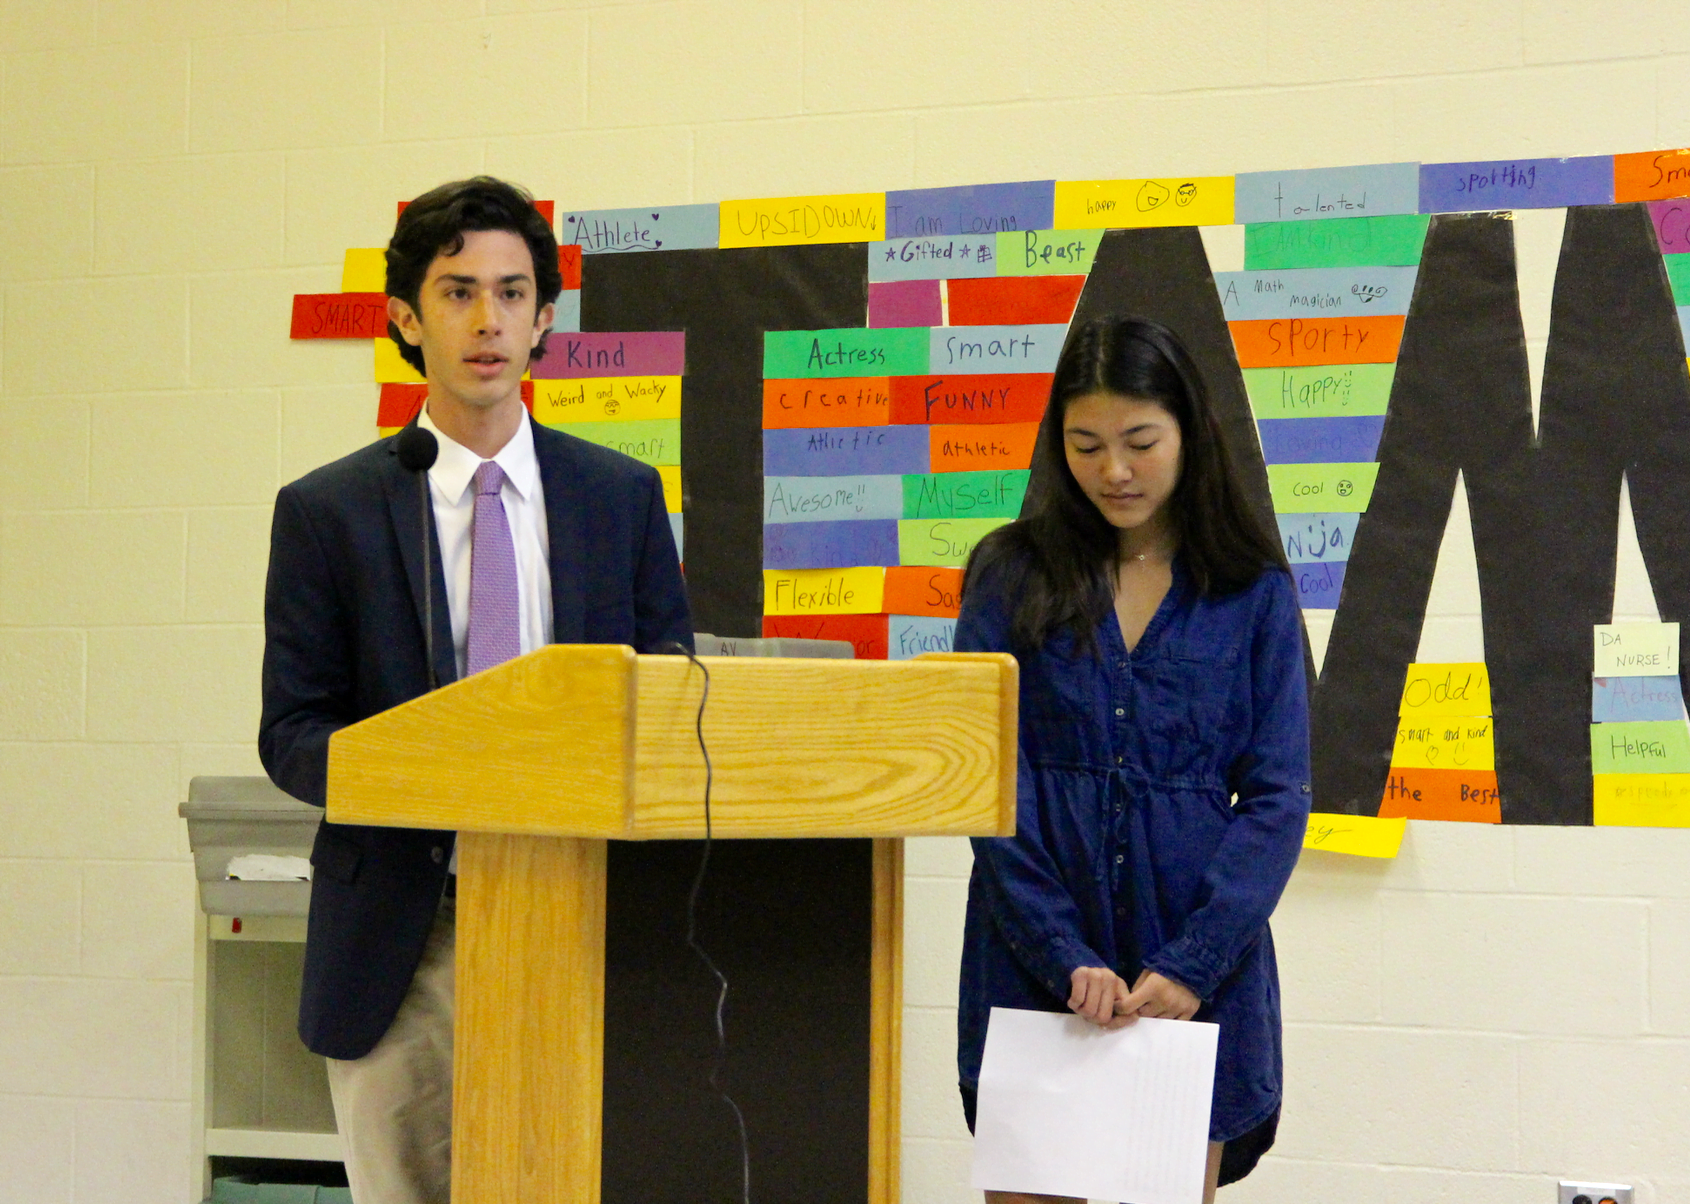 Student government president Greg Goldstein and senior class president Alissa Landberg, addressed the board of Education at Parkway School on Feb 22, 2018 Photo: Leslie Yager